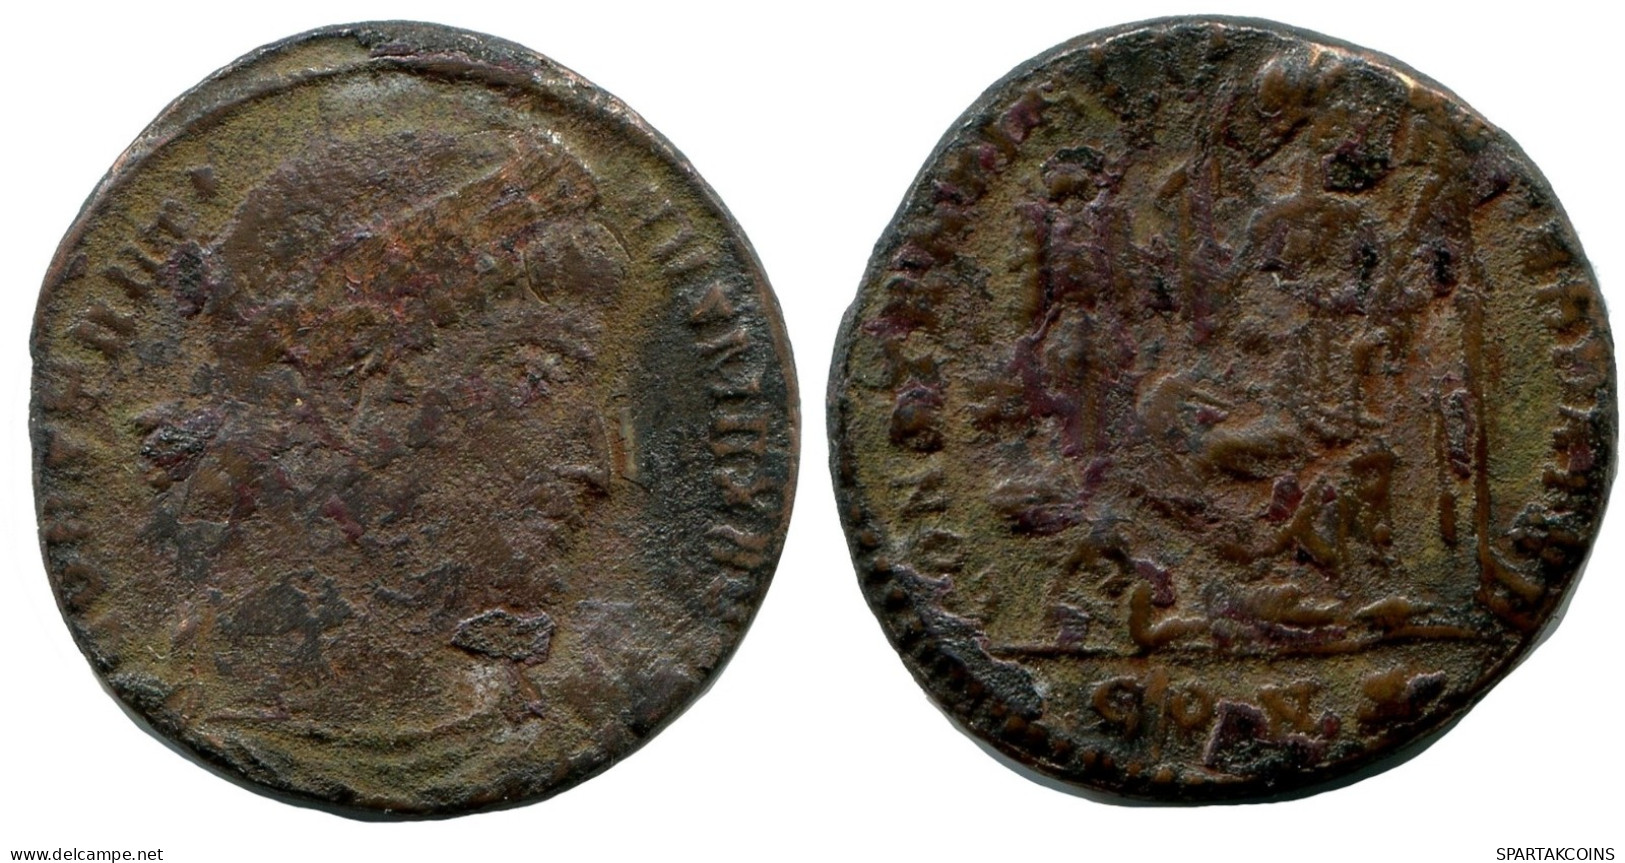 CONSTANTINE I MINTED IN CONSTANTINOPLE FOUND IN IHNASYAH HOARD #ANC10816.14.D.A - The Christian Empire (307 AD To 363 AD)